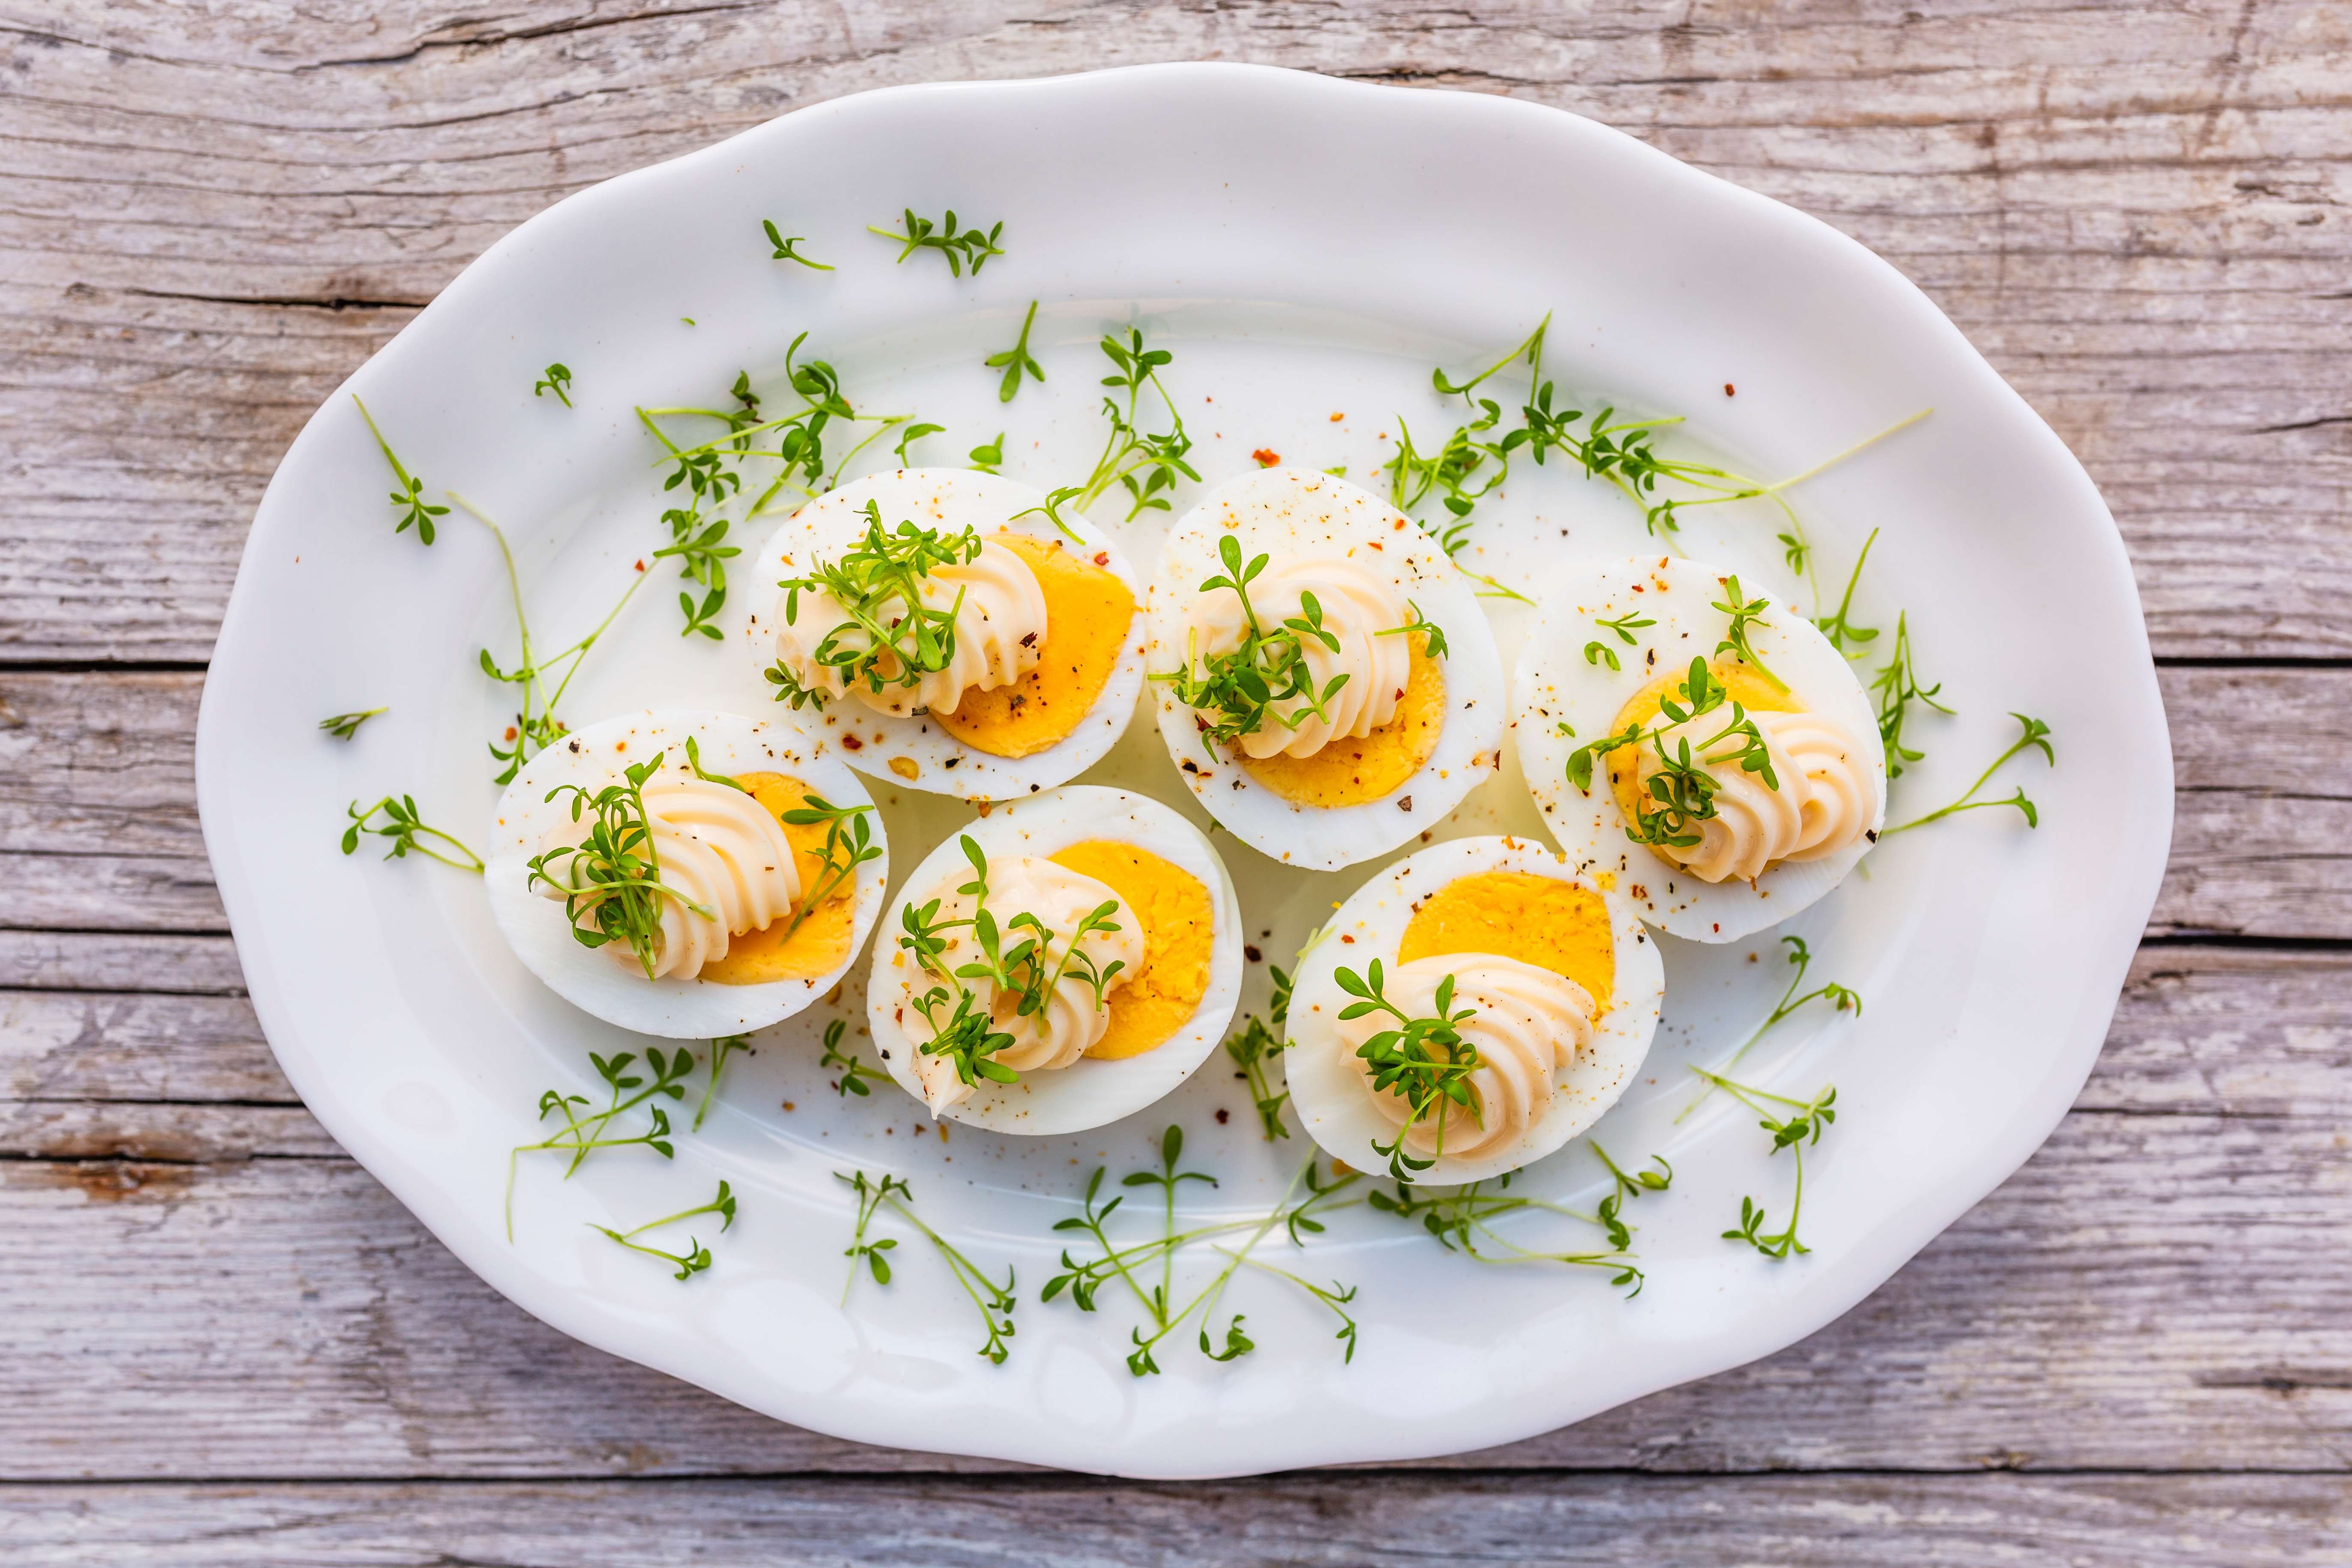 A delicious plate of deviled eggs for family brunch on Easter Sunday.